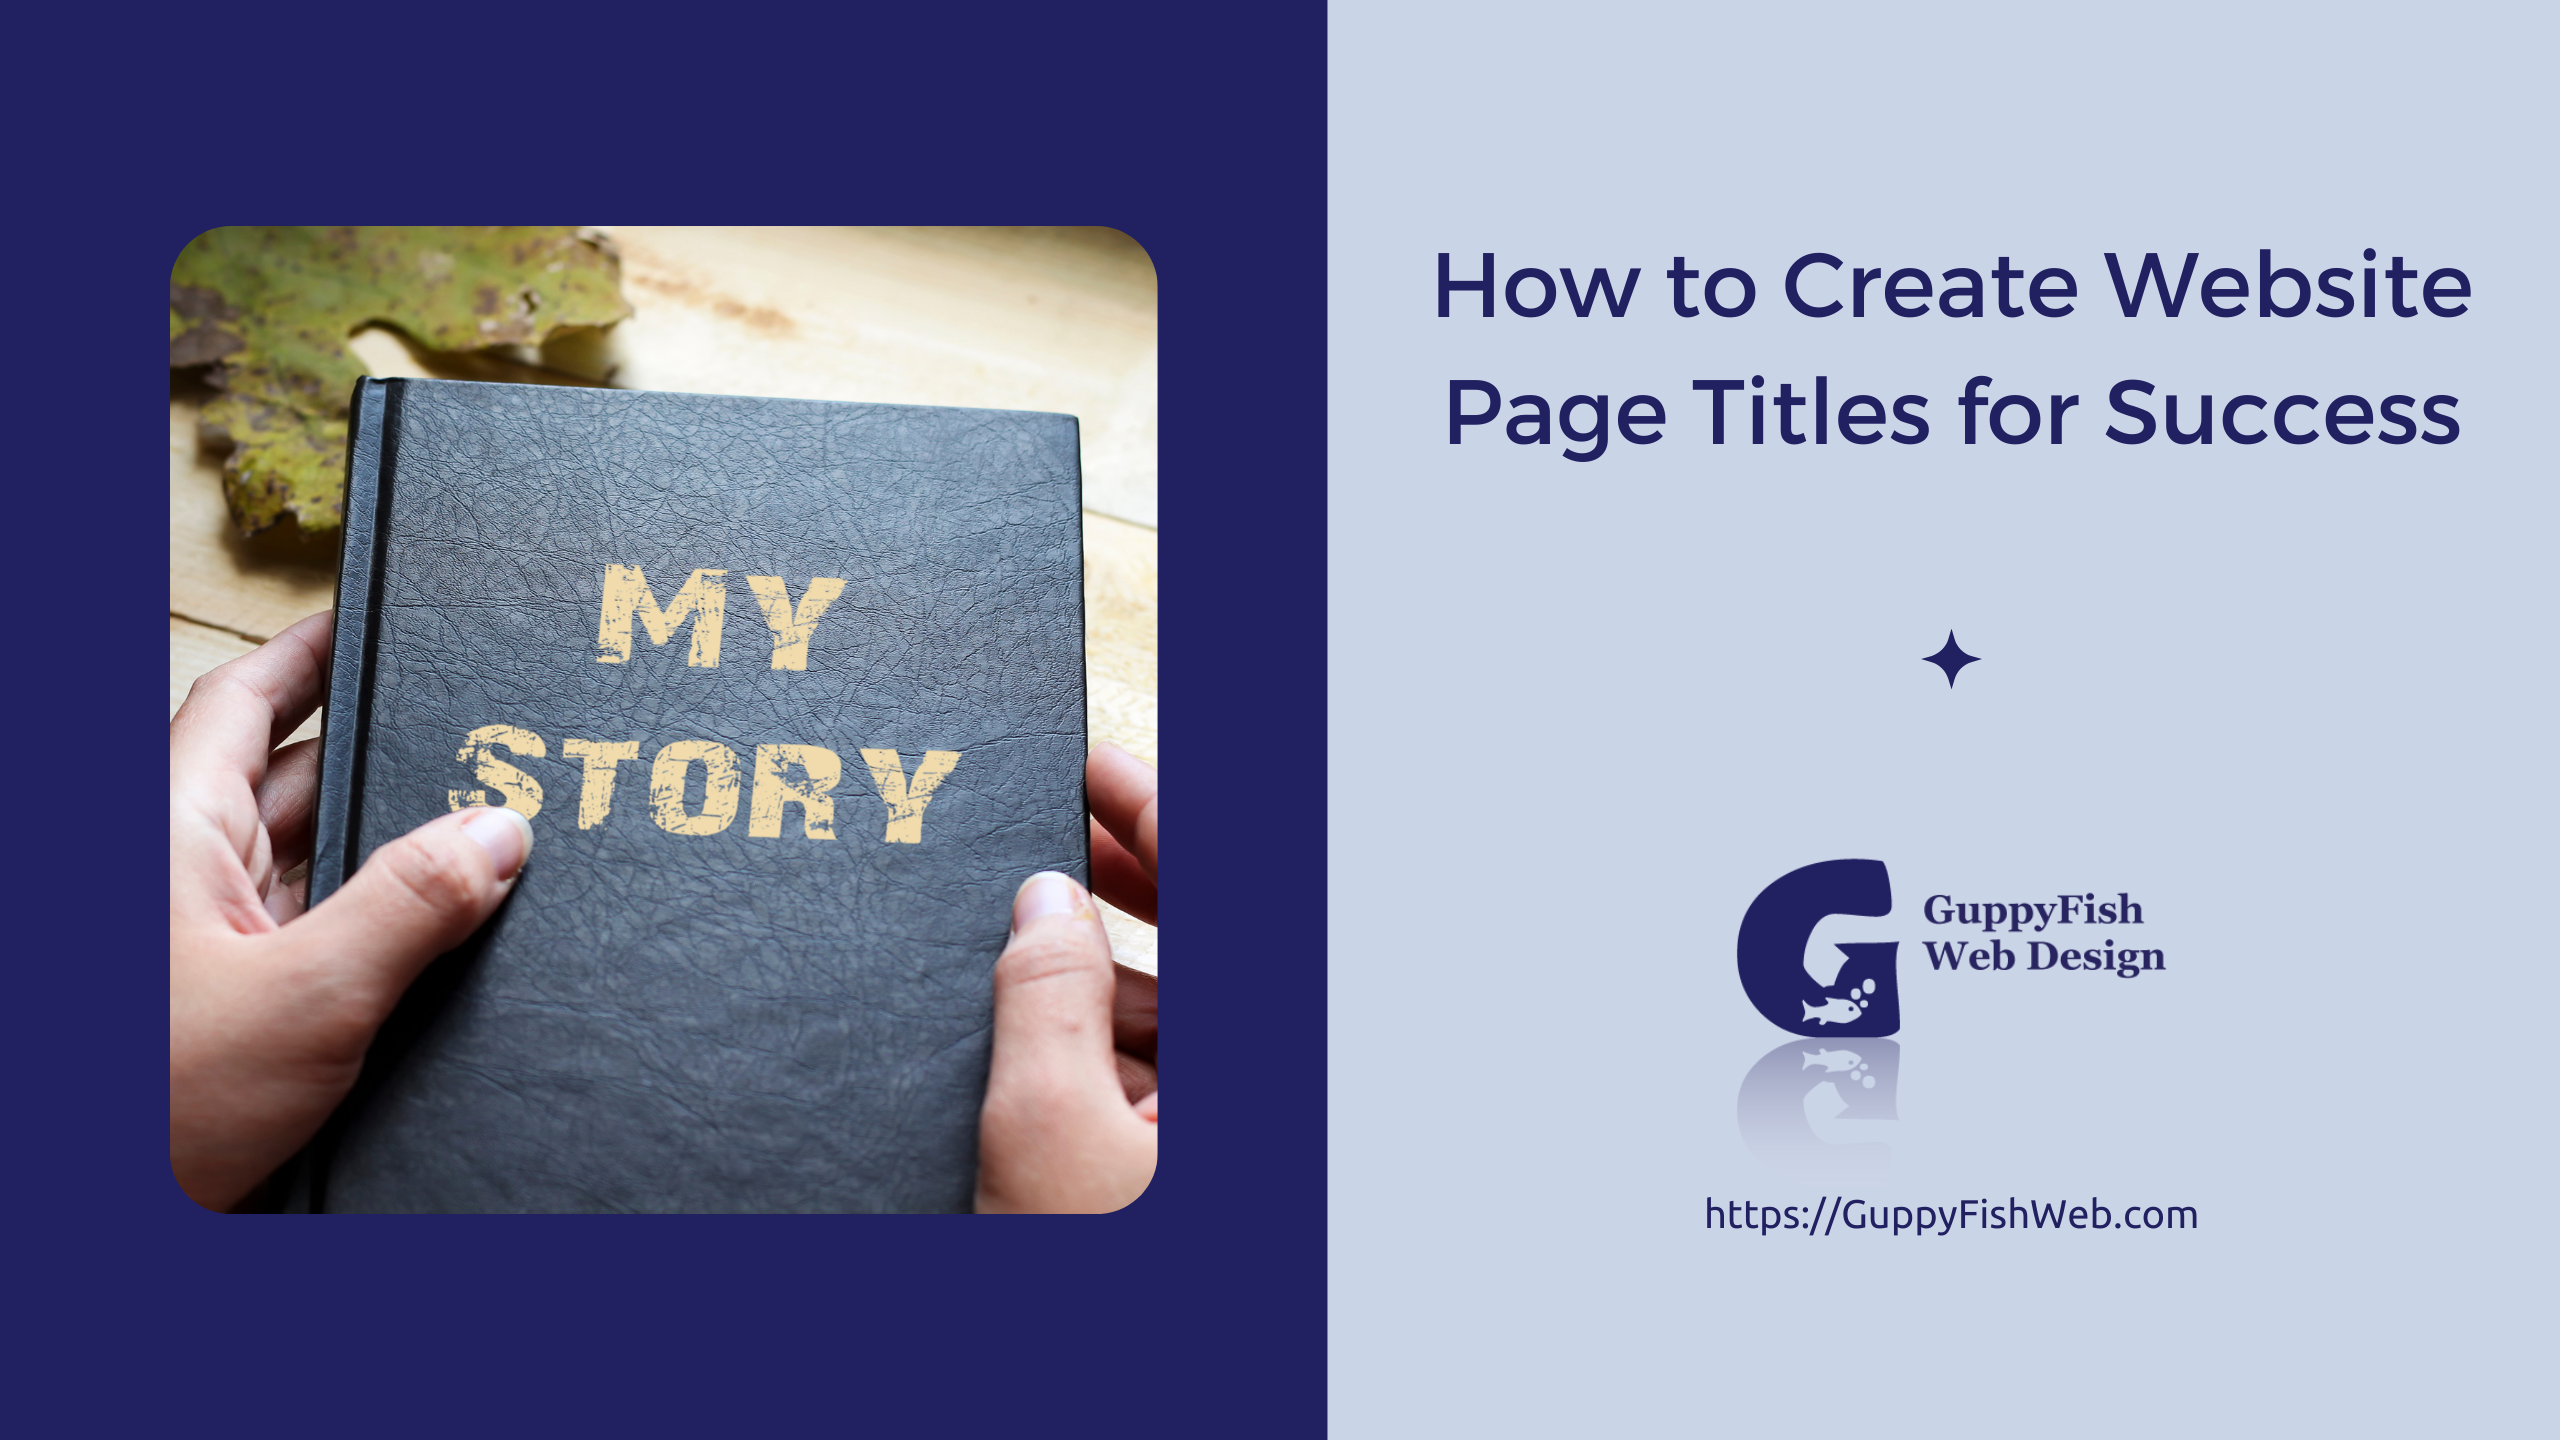 How to Create Website Page Titles for Success